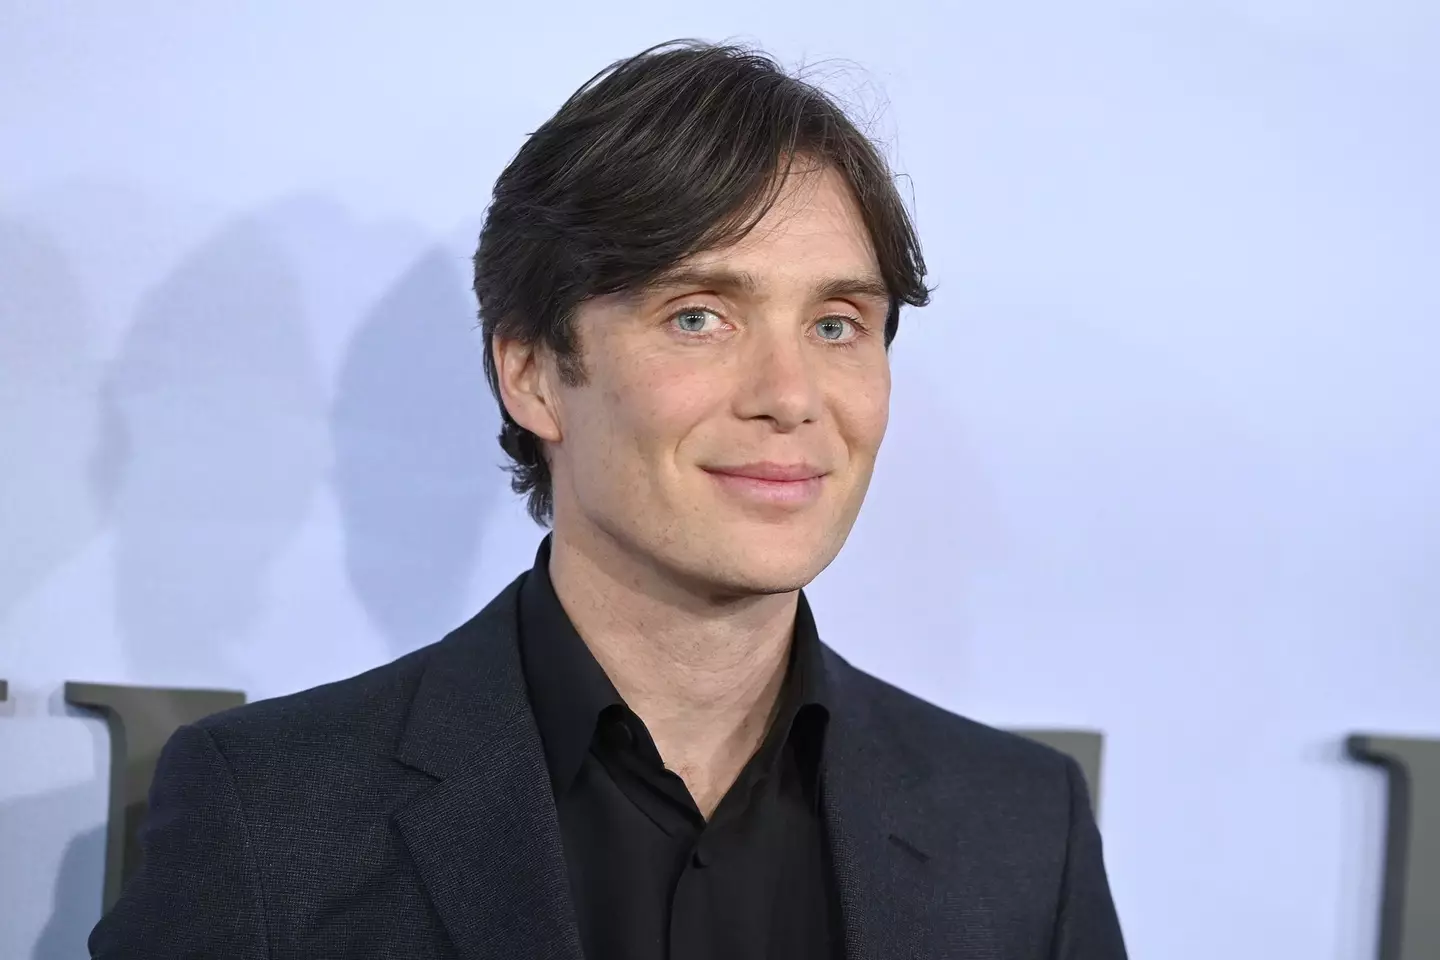 Cillian Murphy is not keen on fans taking pictures of him.